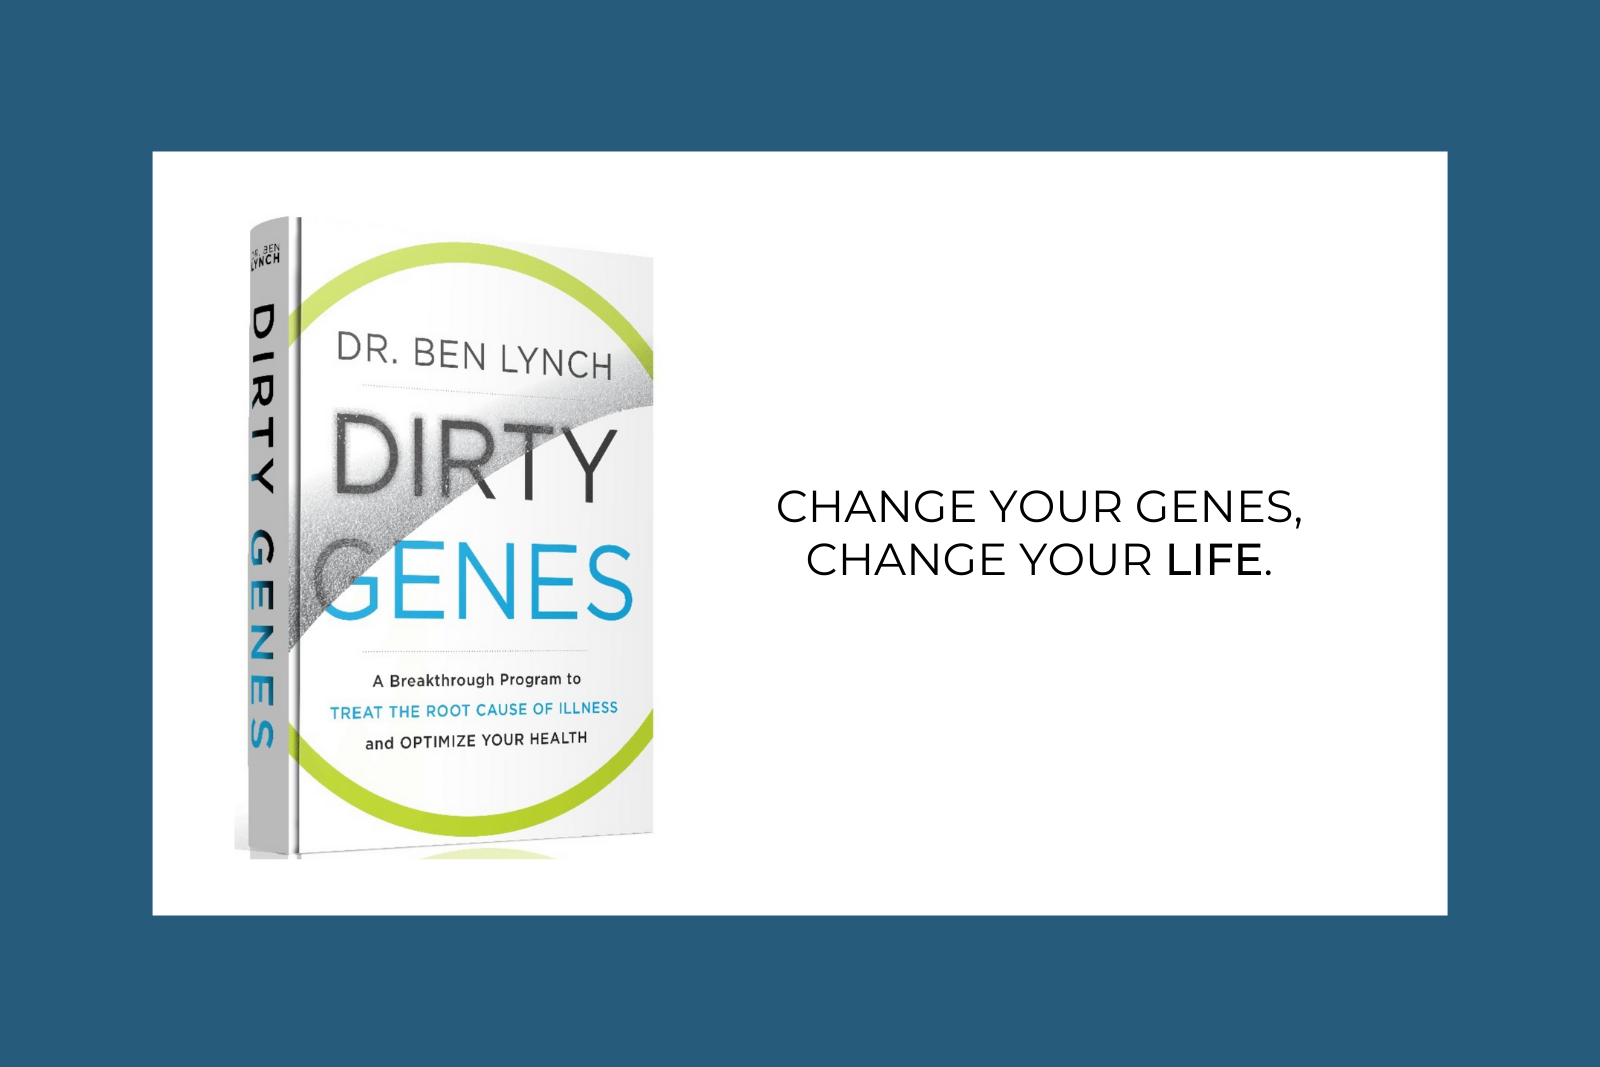 How to Clean Your Dirty Genes